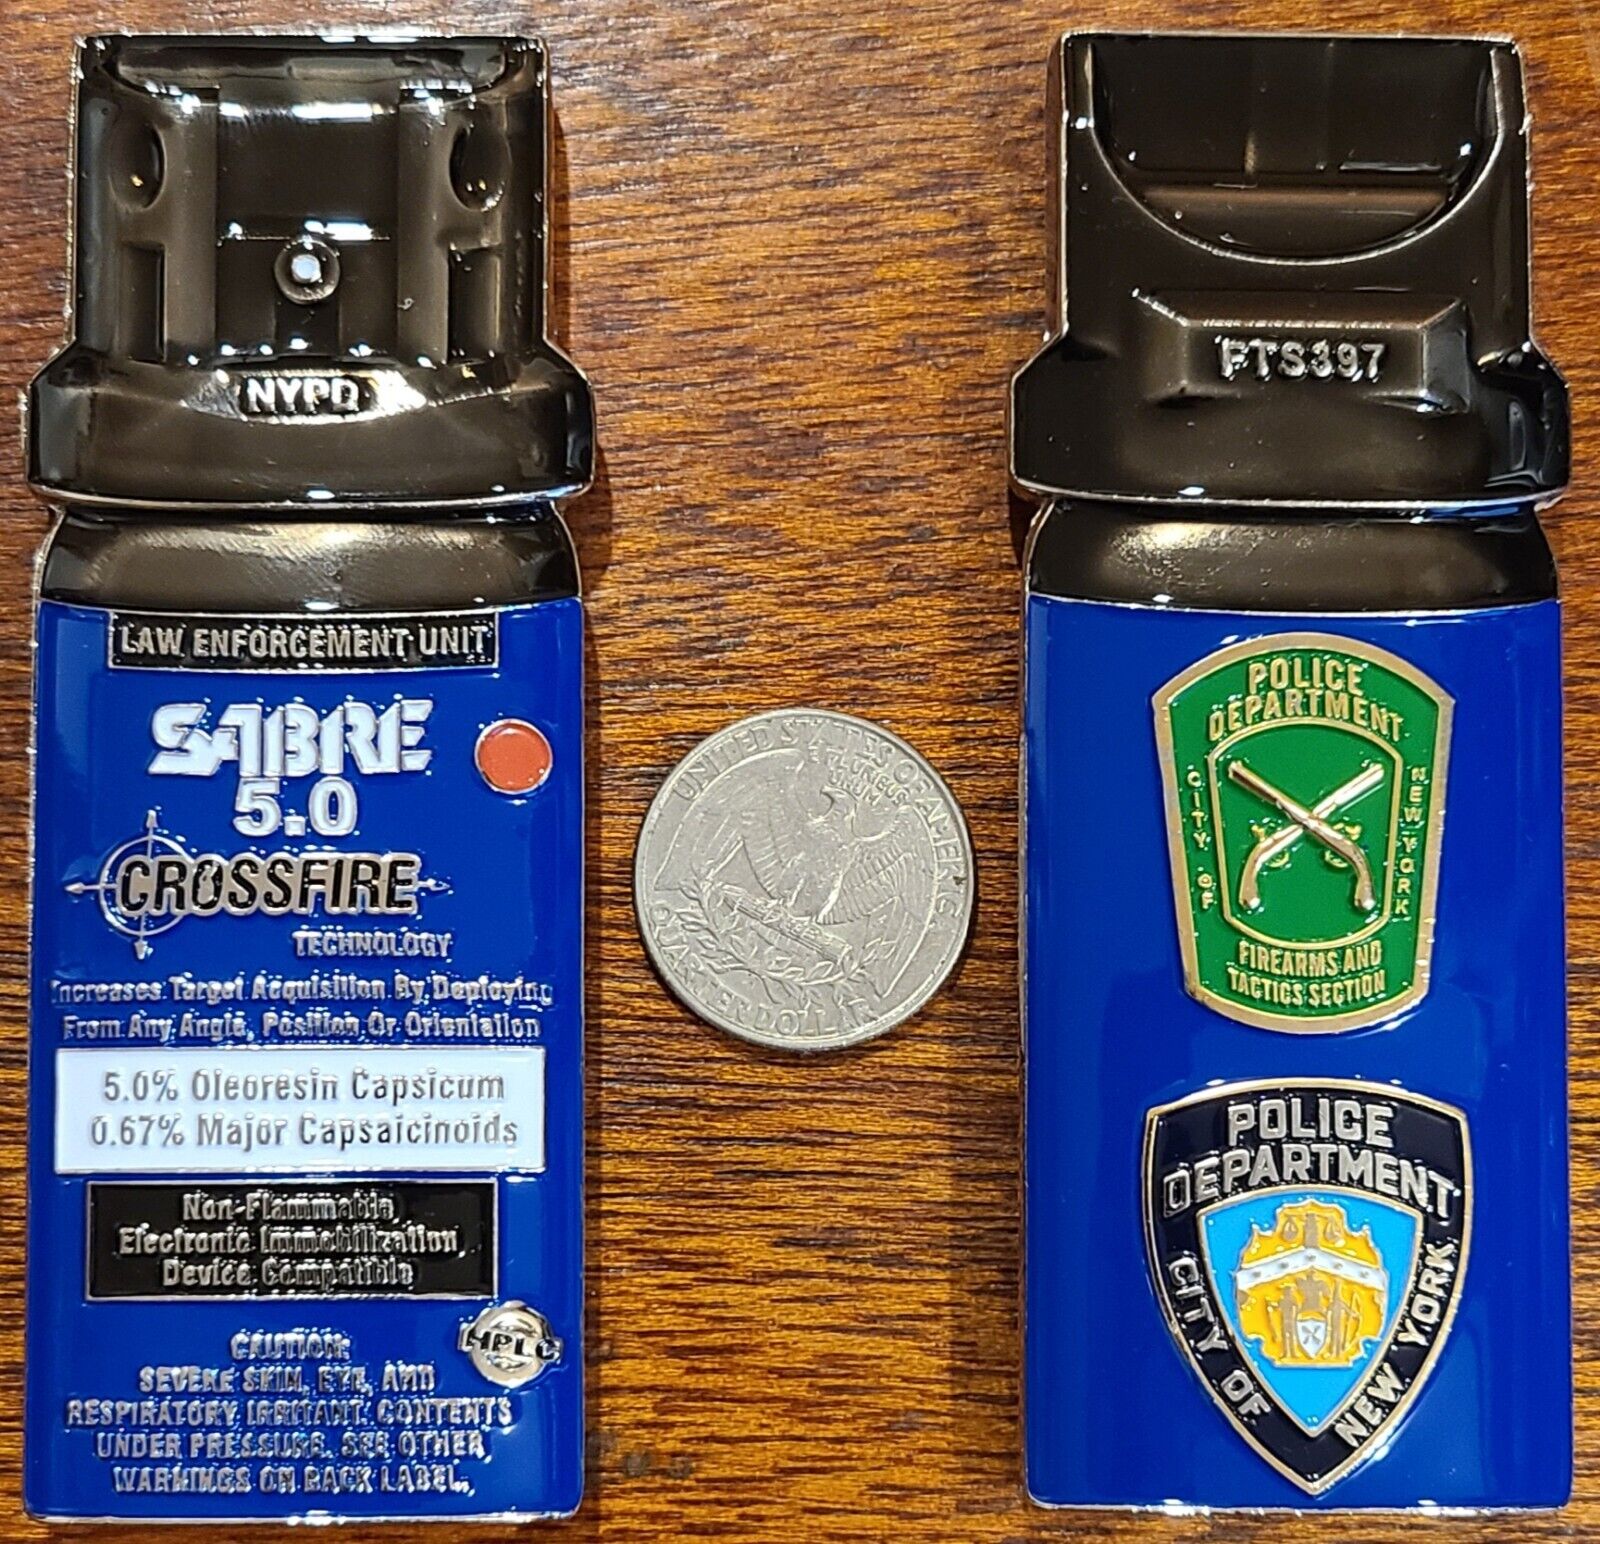 NYPD Firearms & Tactics Section -Sabre OC Pepper Spray Instructor Challenge Coin